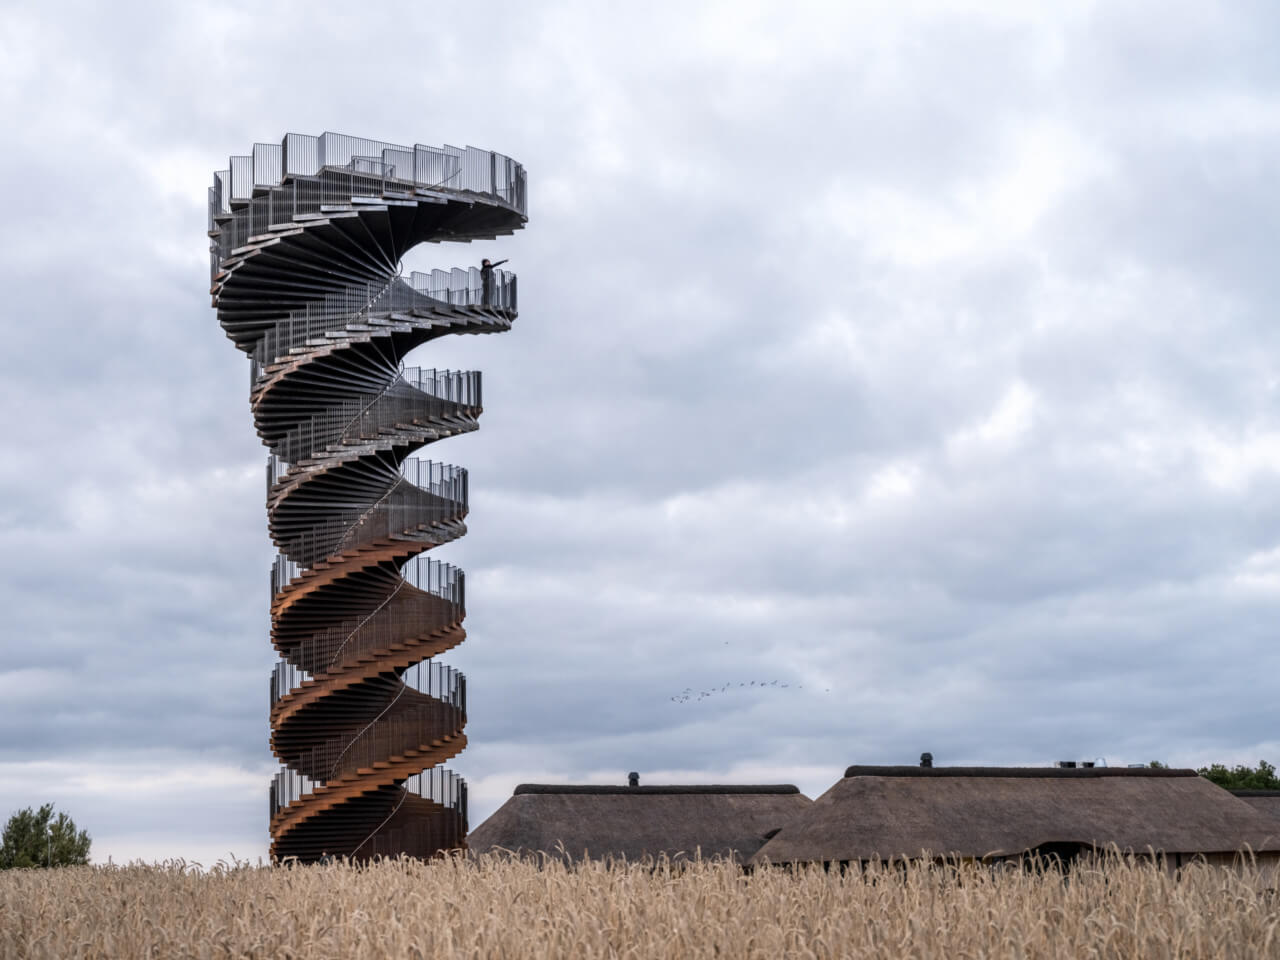 view of a spiraling observation tower surrounded by marshland and low buildings